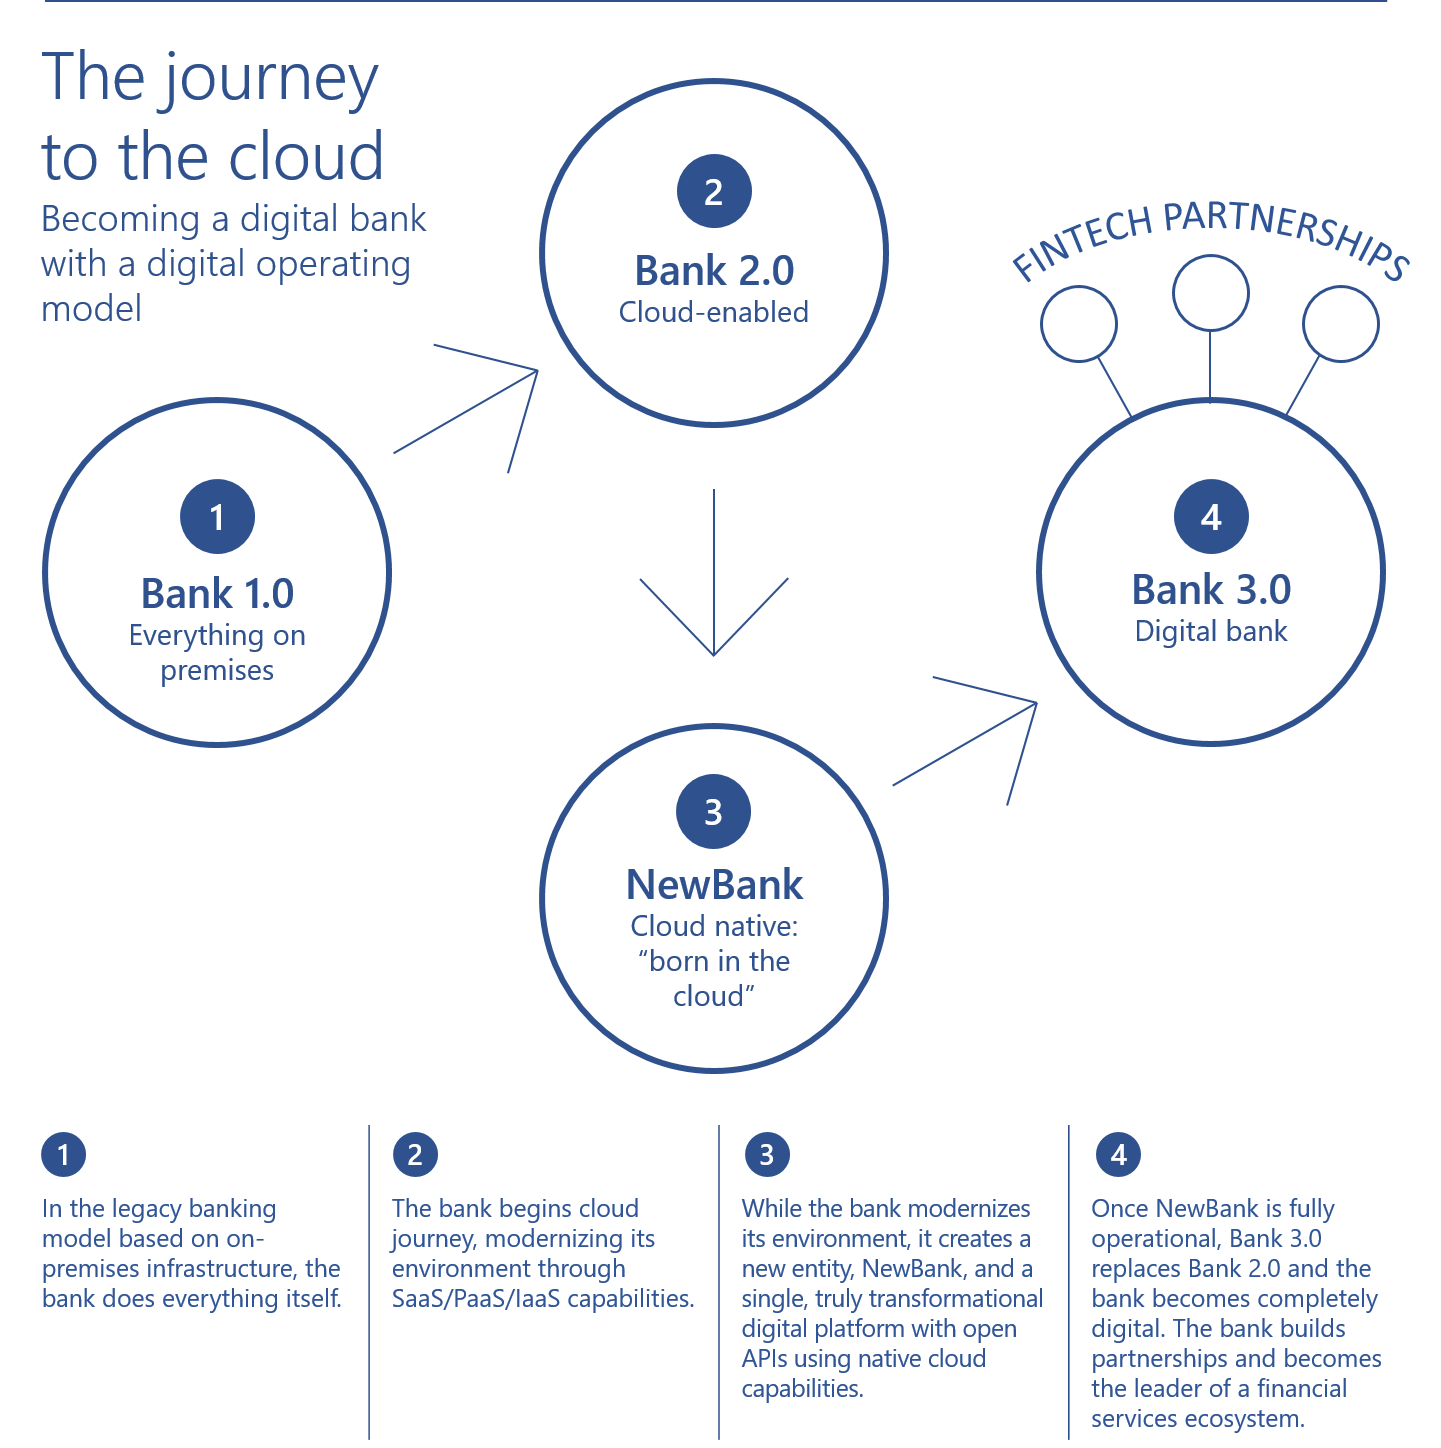 The Journey to the cloud